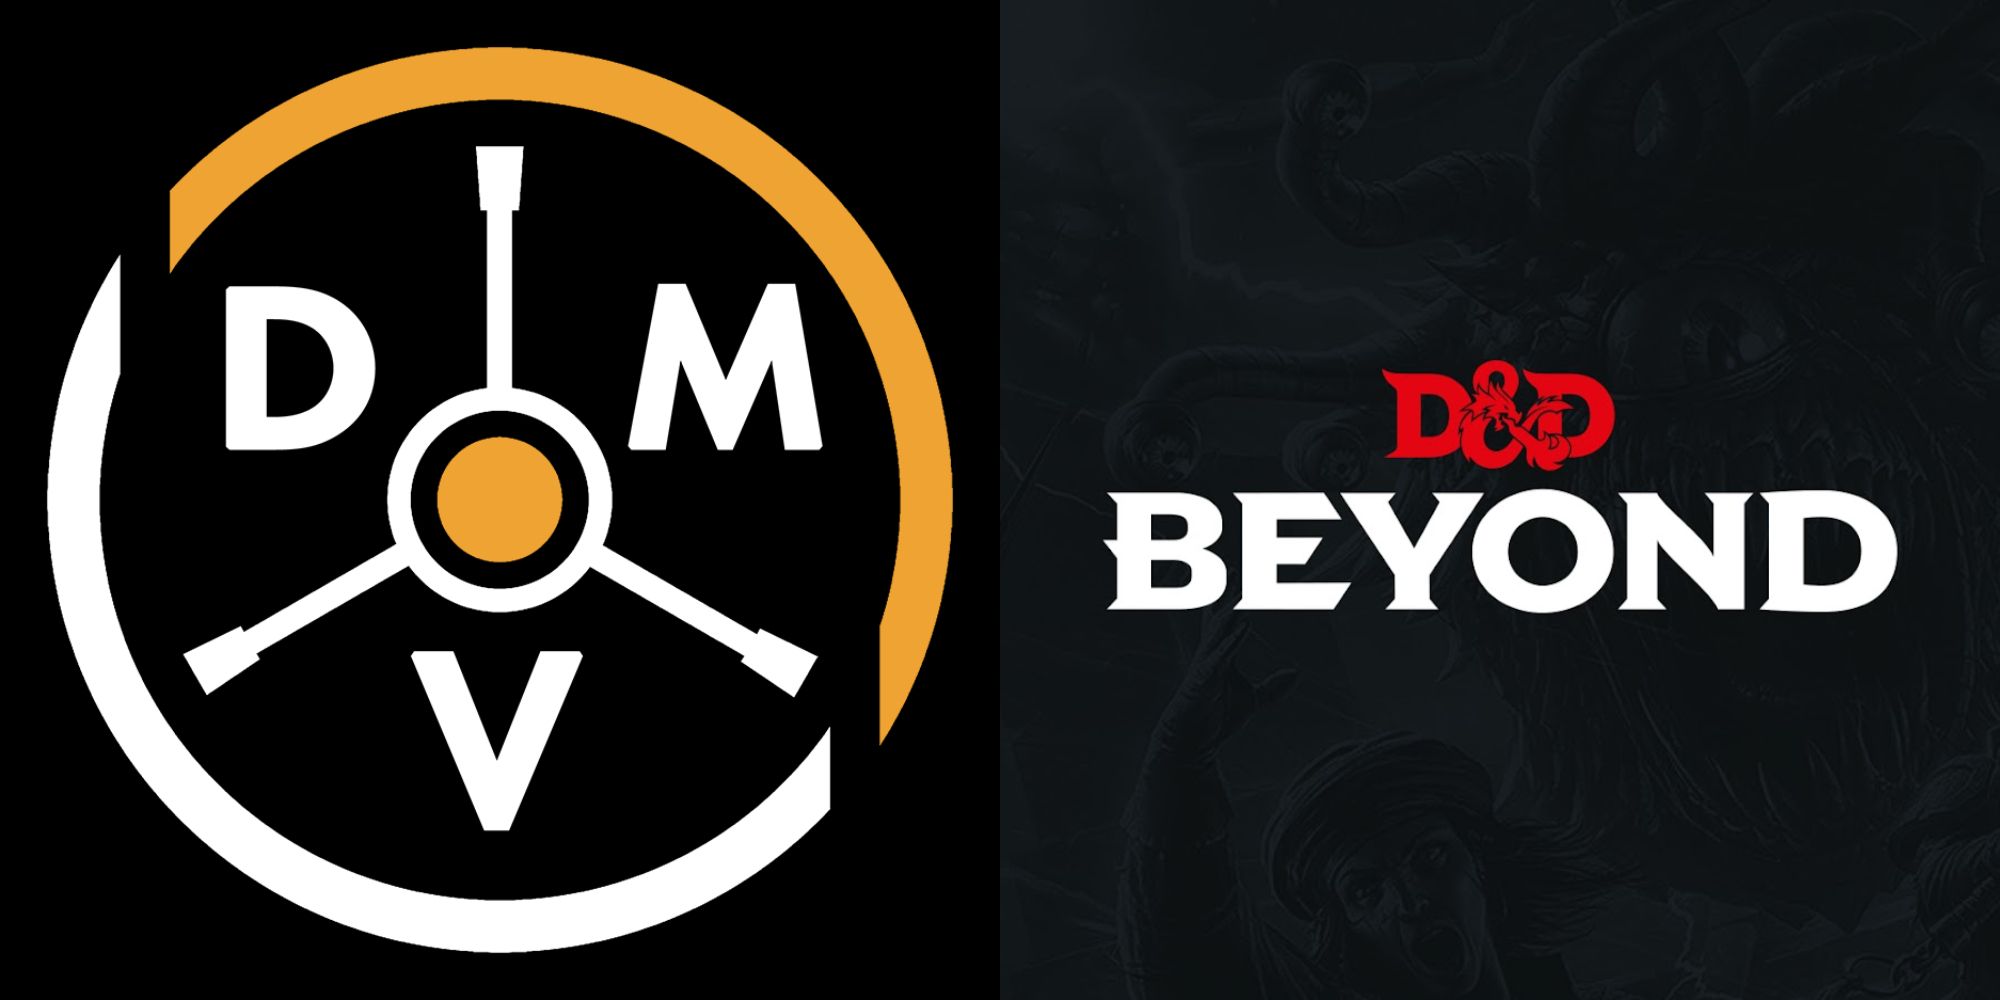 Split image showing logos for the Dungeon Master’s Vault and D&D Beyond character creators